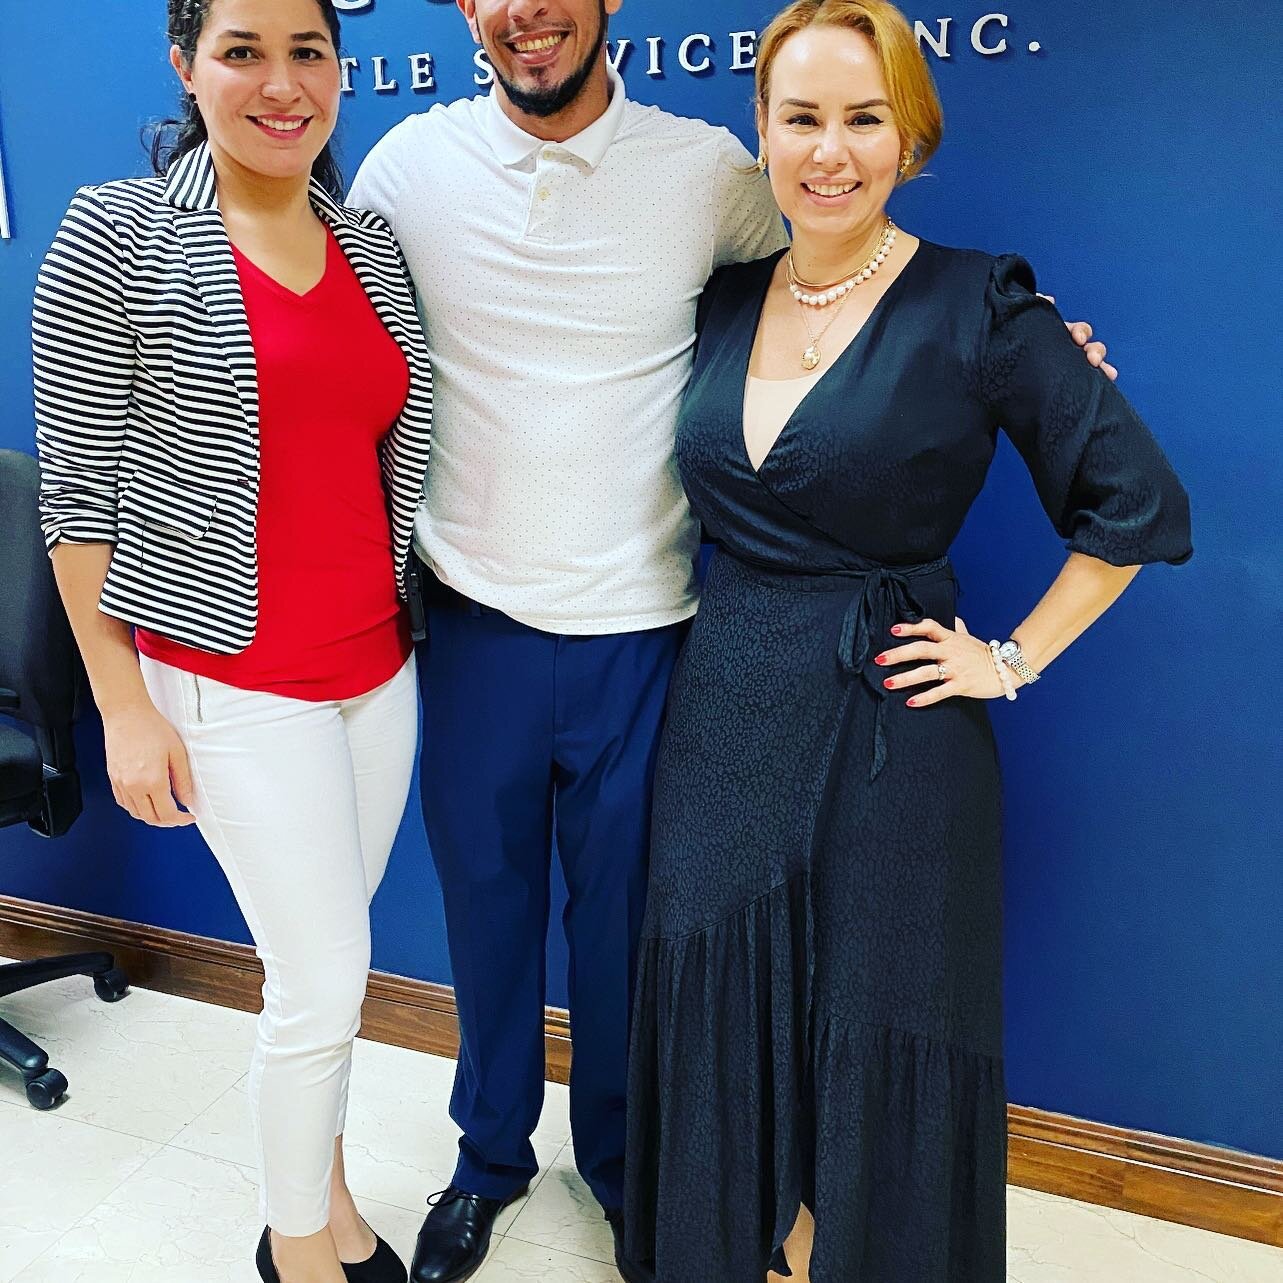 Happy Friday! 😀 Congratulations to another happy couple on their home purchase! 🏚🗝👏👏 Thank you @linamarealtor for trusting us with your clients, and for your professionalism. You are one of the best in town. 💯💯 #realestate #closings #firsthome